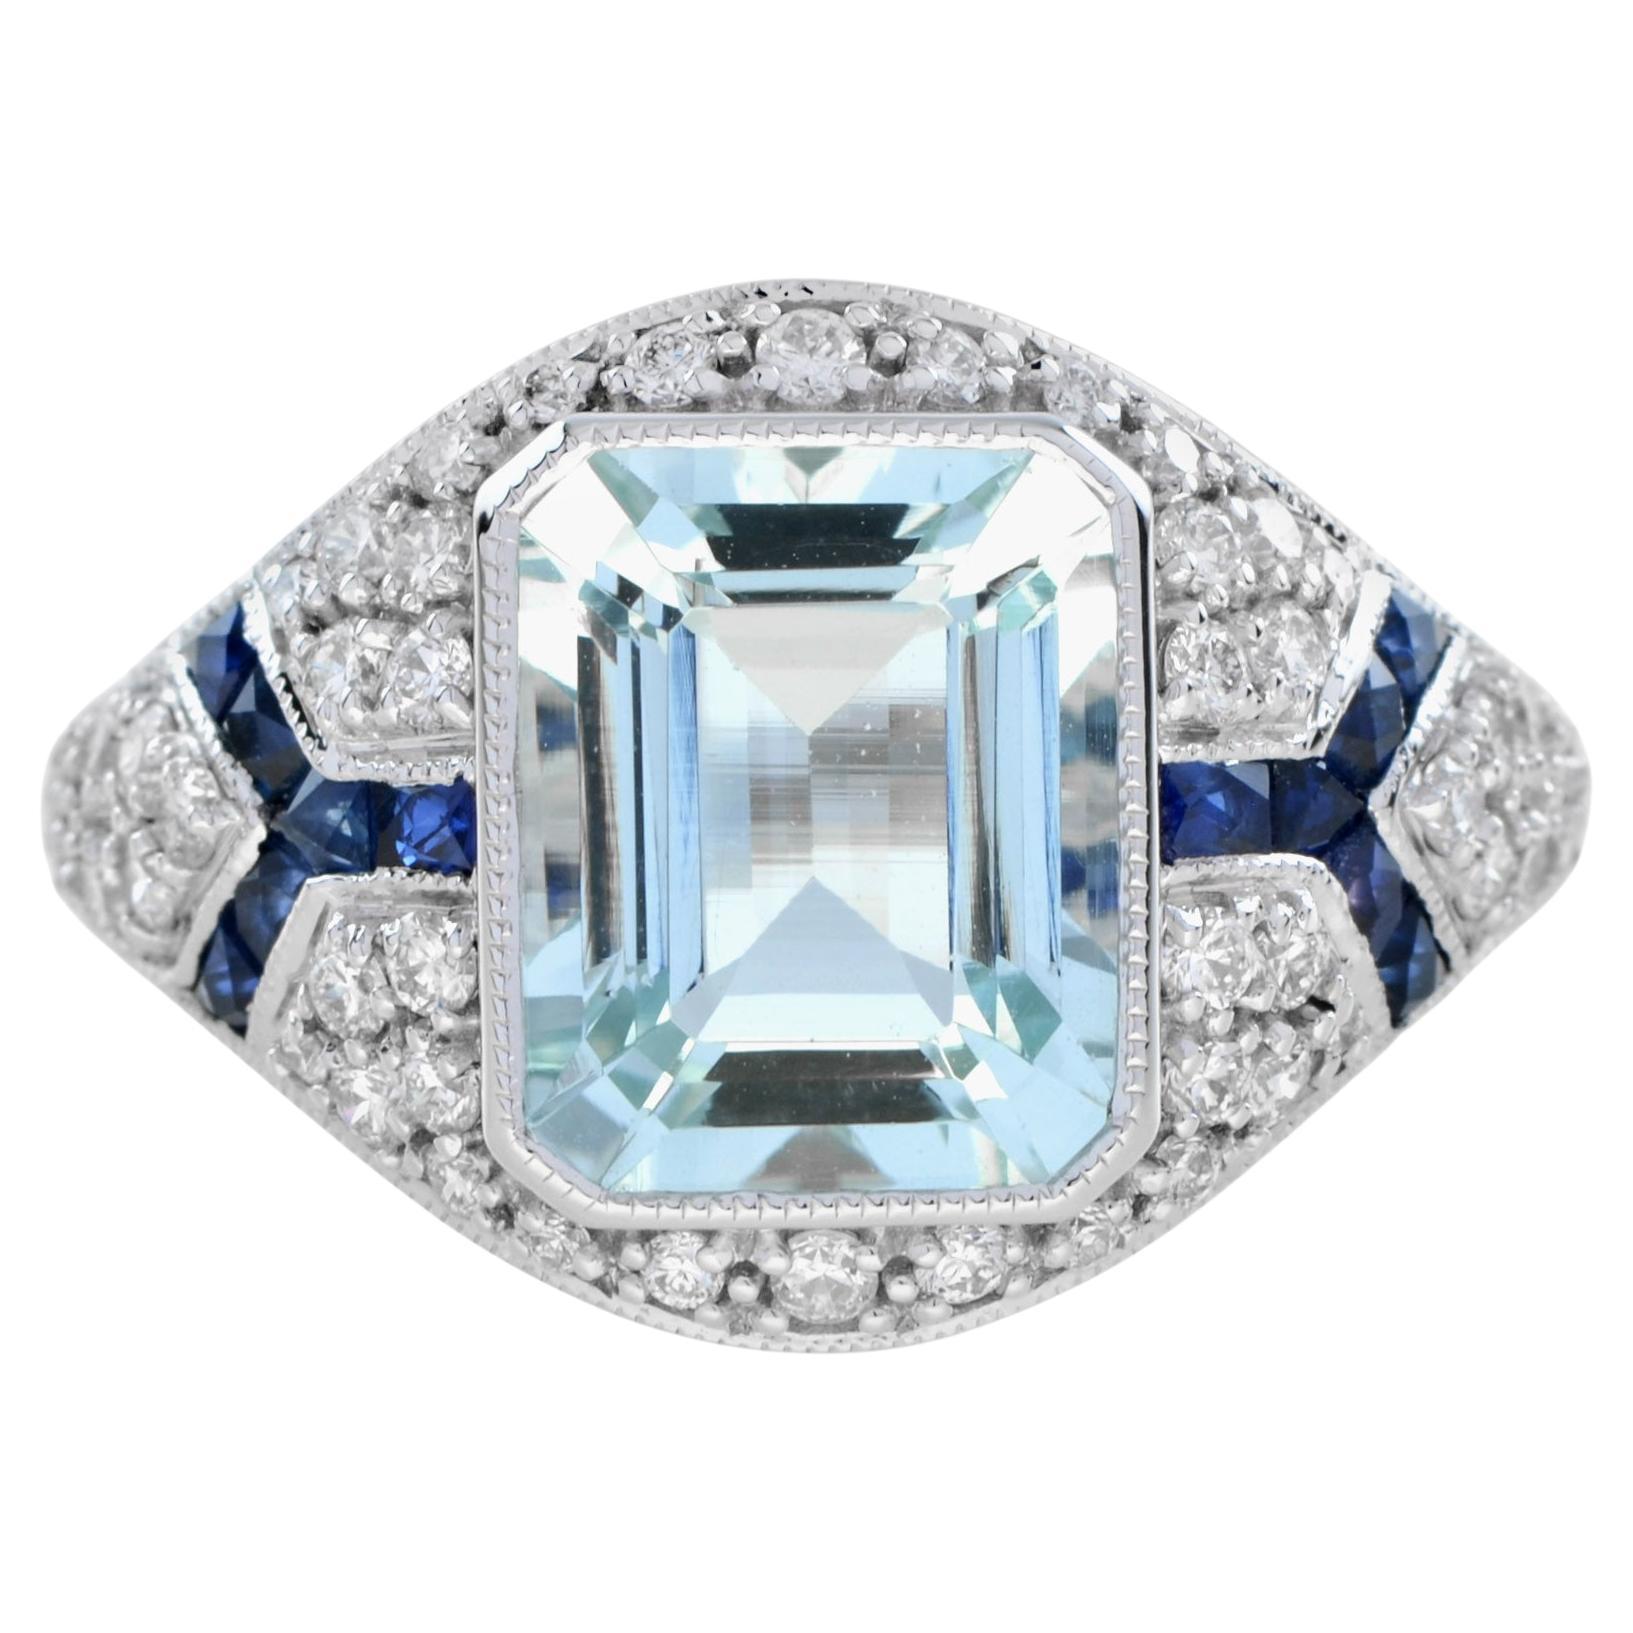 Aquamarine Blue Sapphire Diamond Art Deco Style Engagement Ring in 14K Gold For Sale